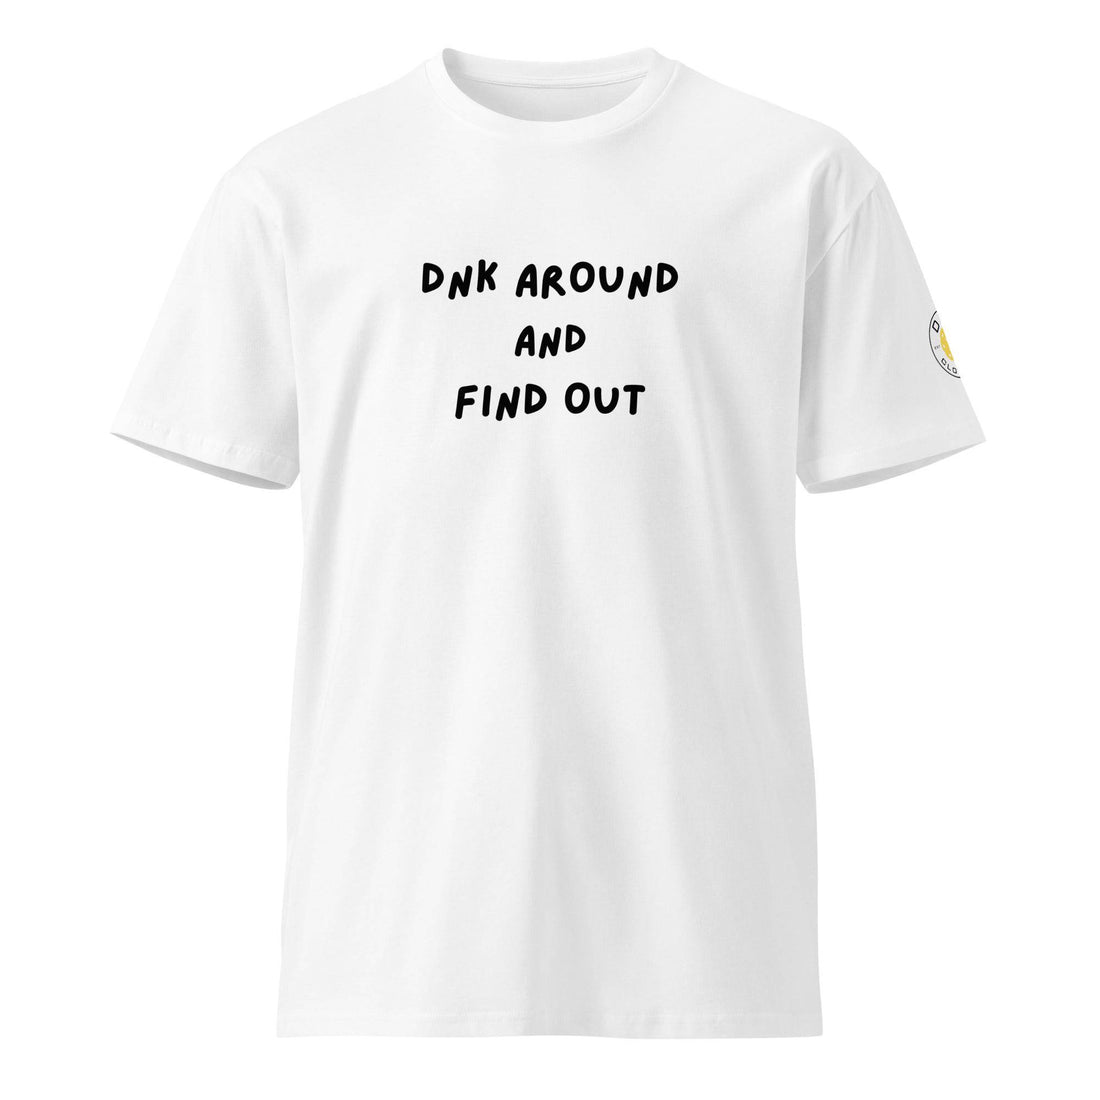 DNK Around and Find Out Tee - DNK Clothing